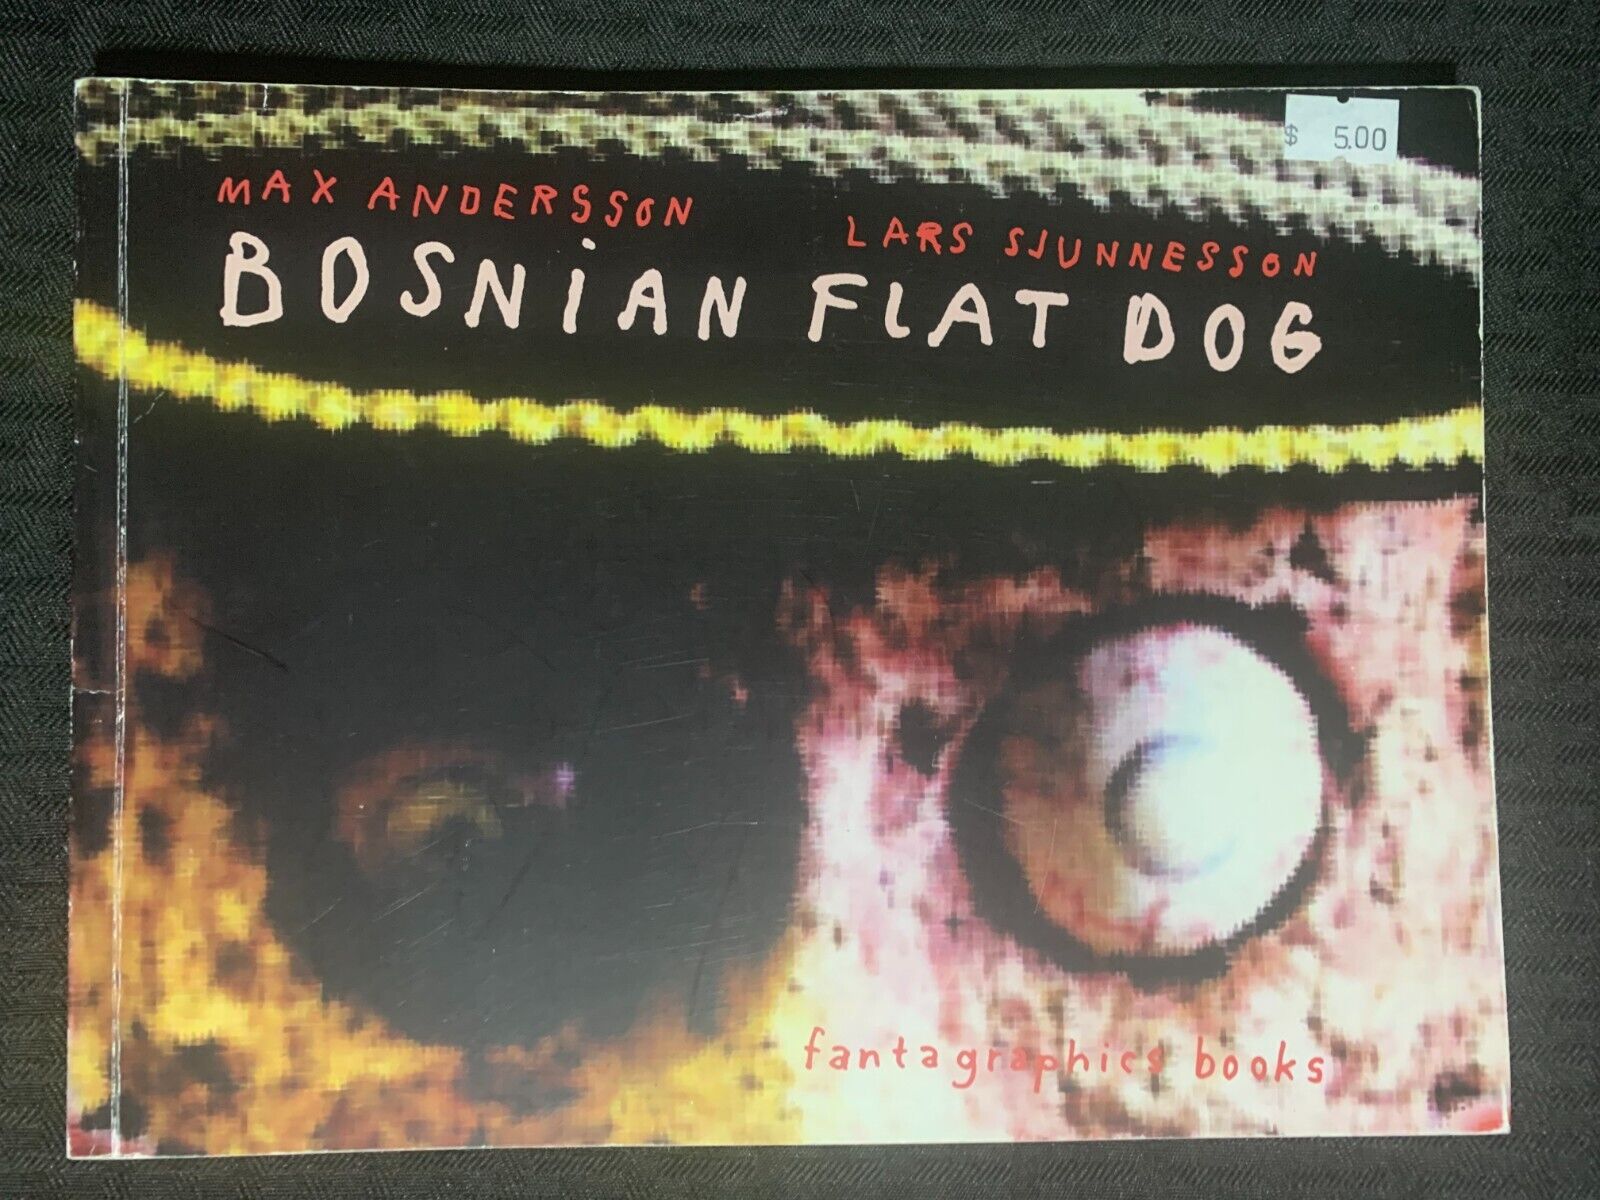 2006 BOSNIAN FLAT DOG by Max Andersson SC FN 6.0 1st Fantagraphics